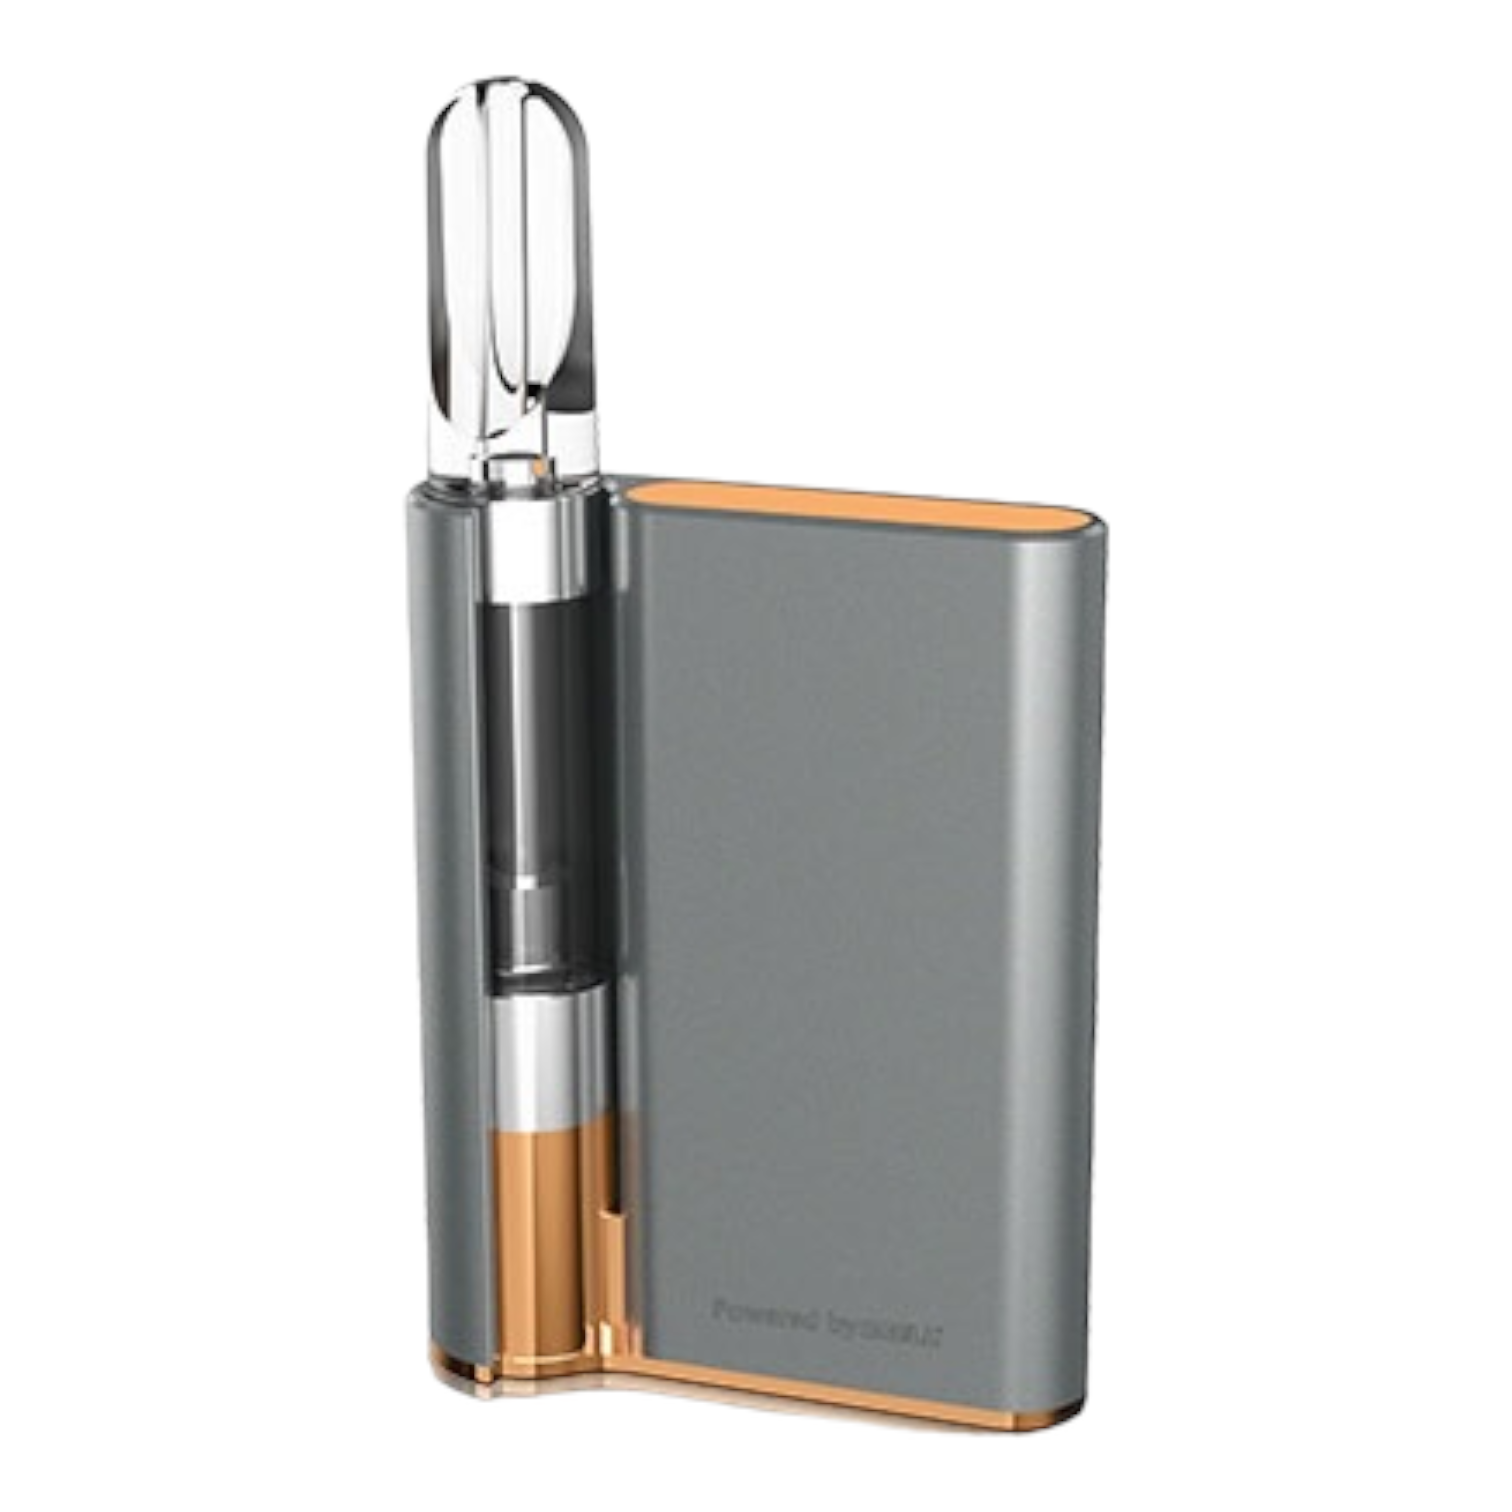 CCELL - Palm Battery - Gray & Orange